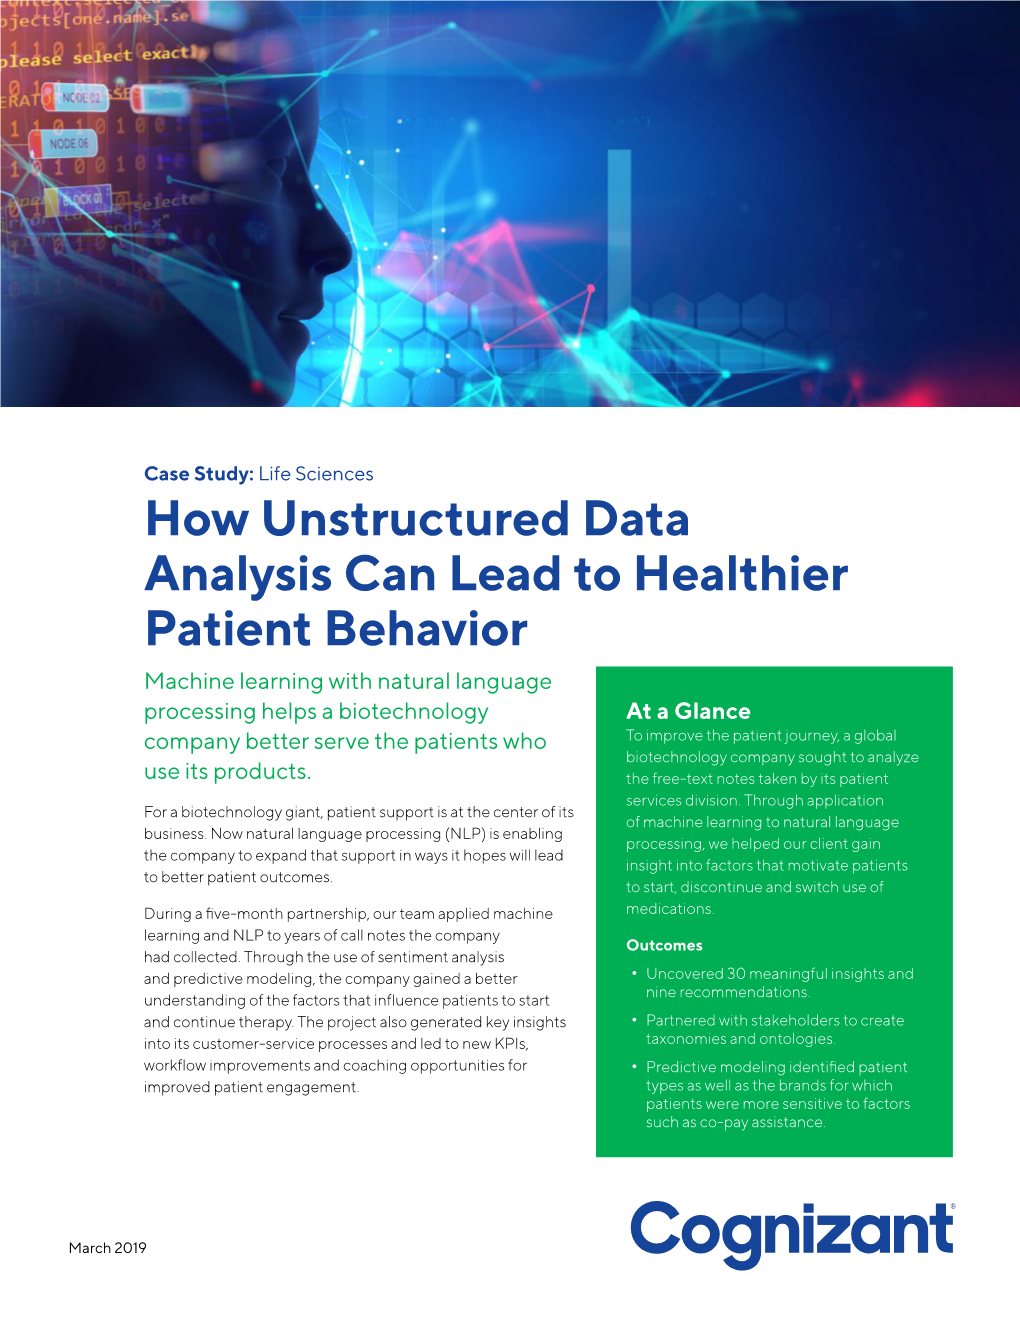 How Unstructured Data Analysis Can Lead to Healthier Patient Behavior